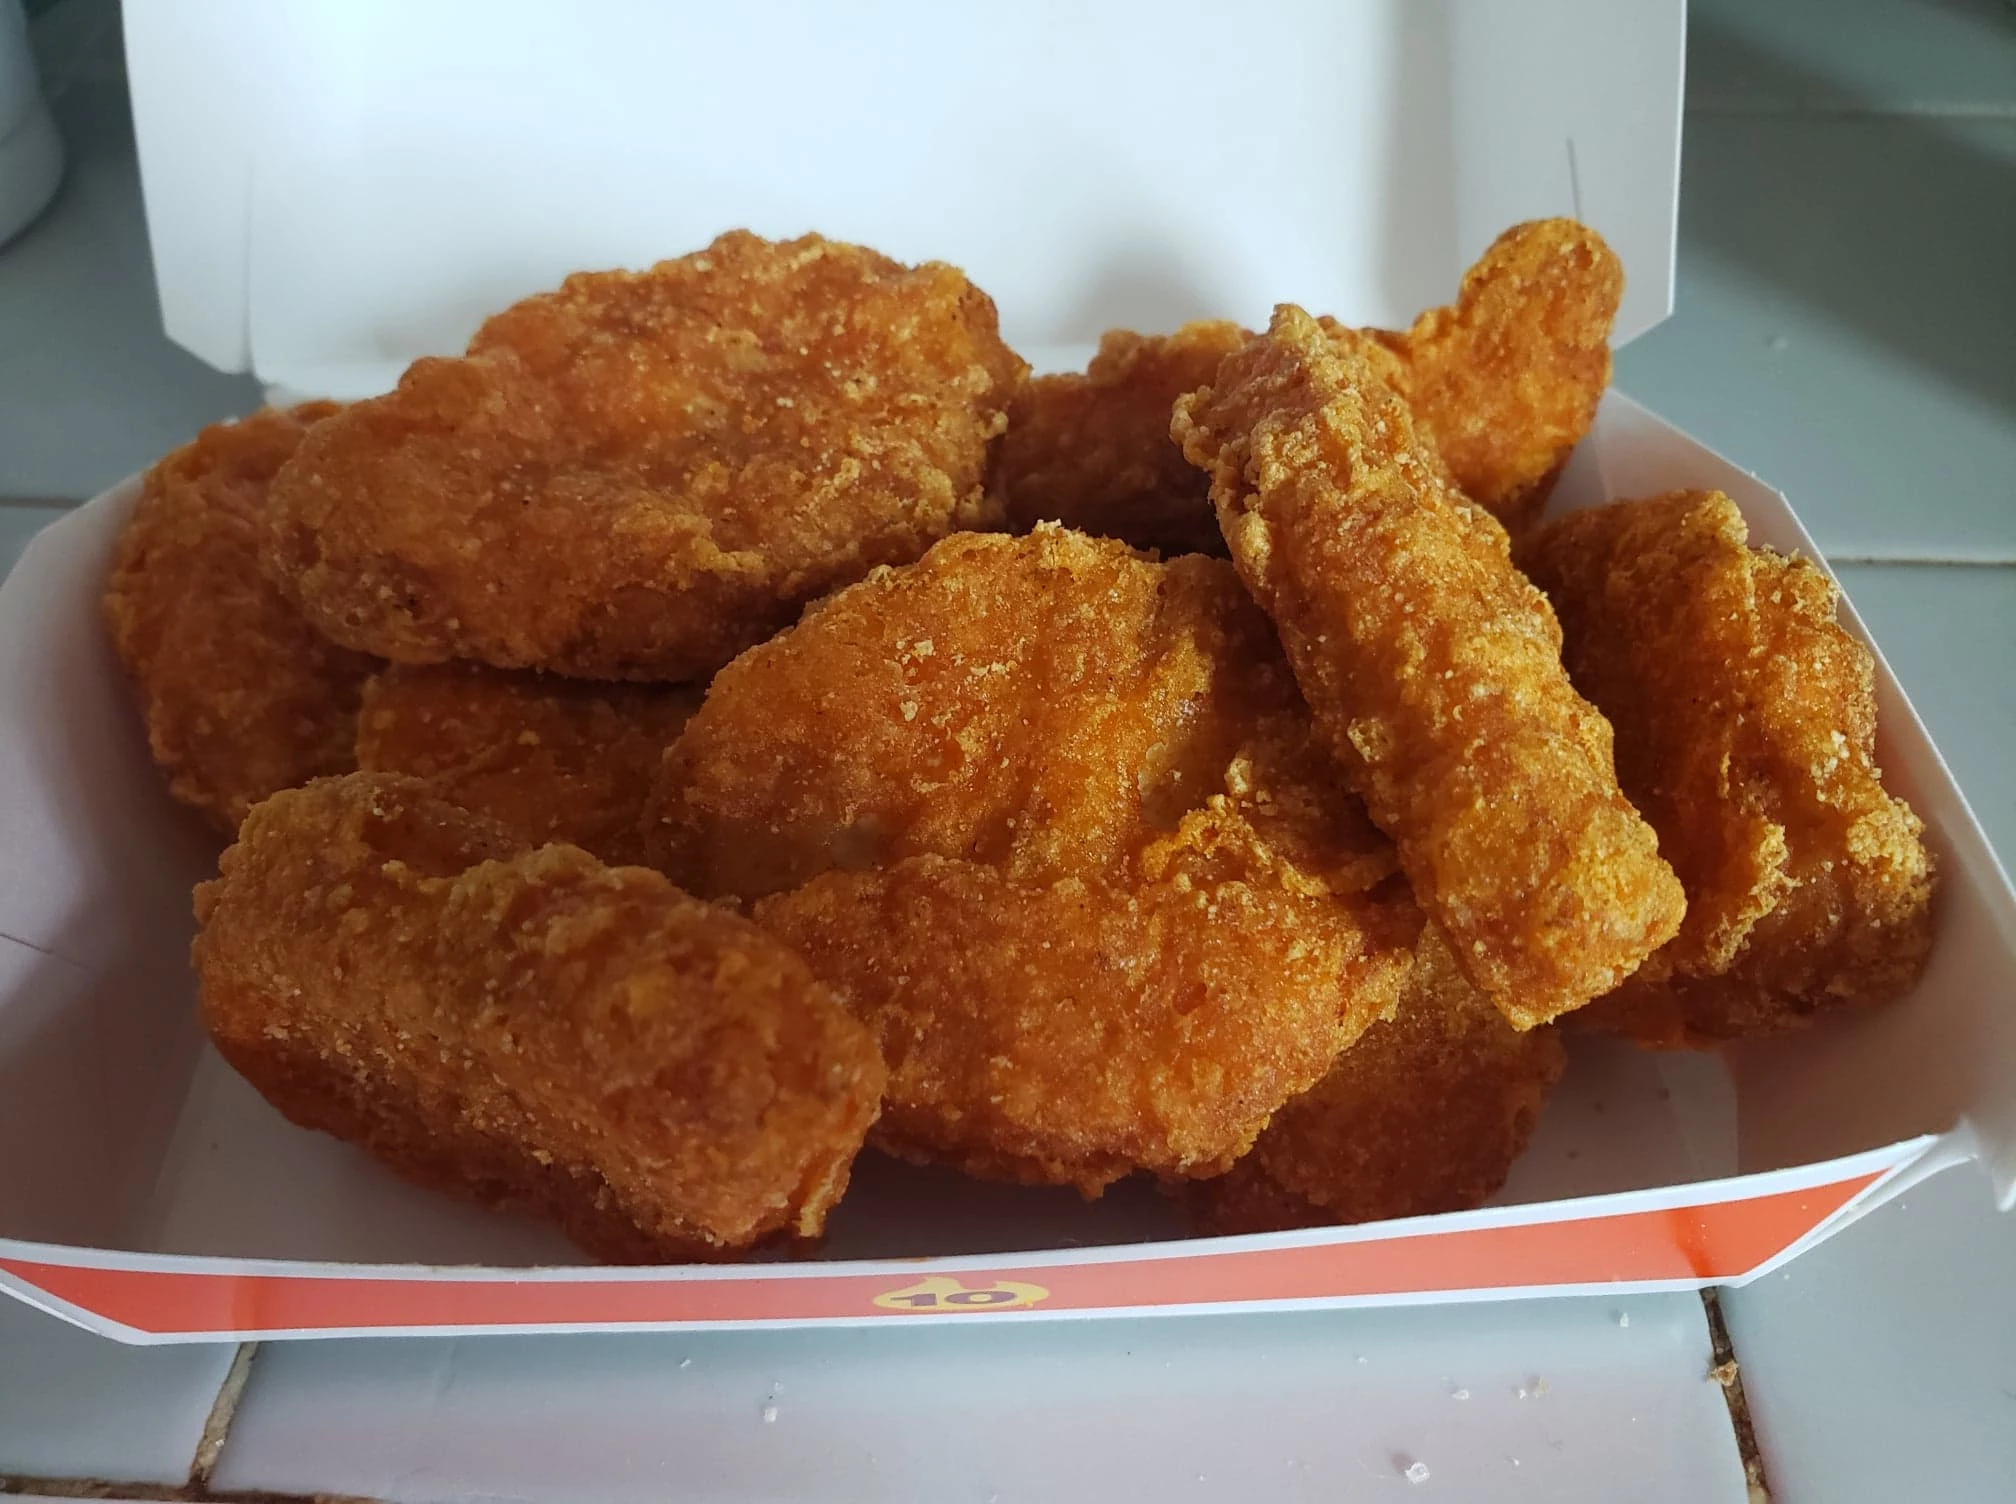 Spicy Chicken McNuggets Are Back at McDonald's